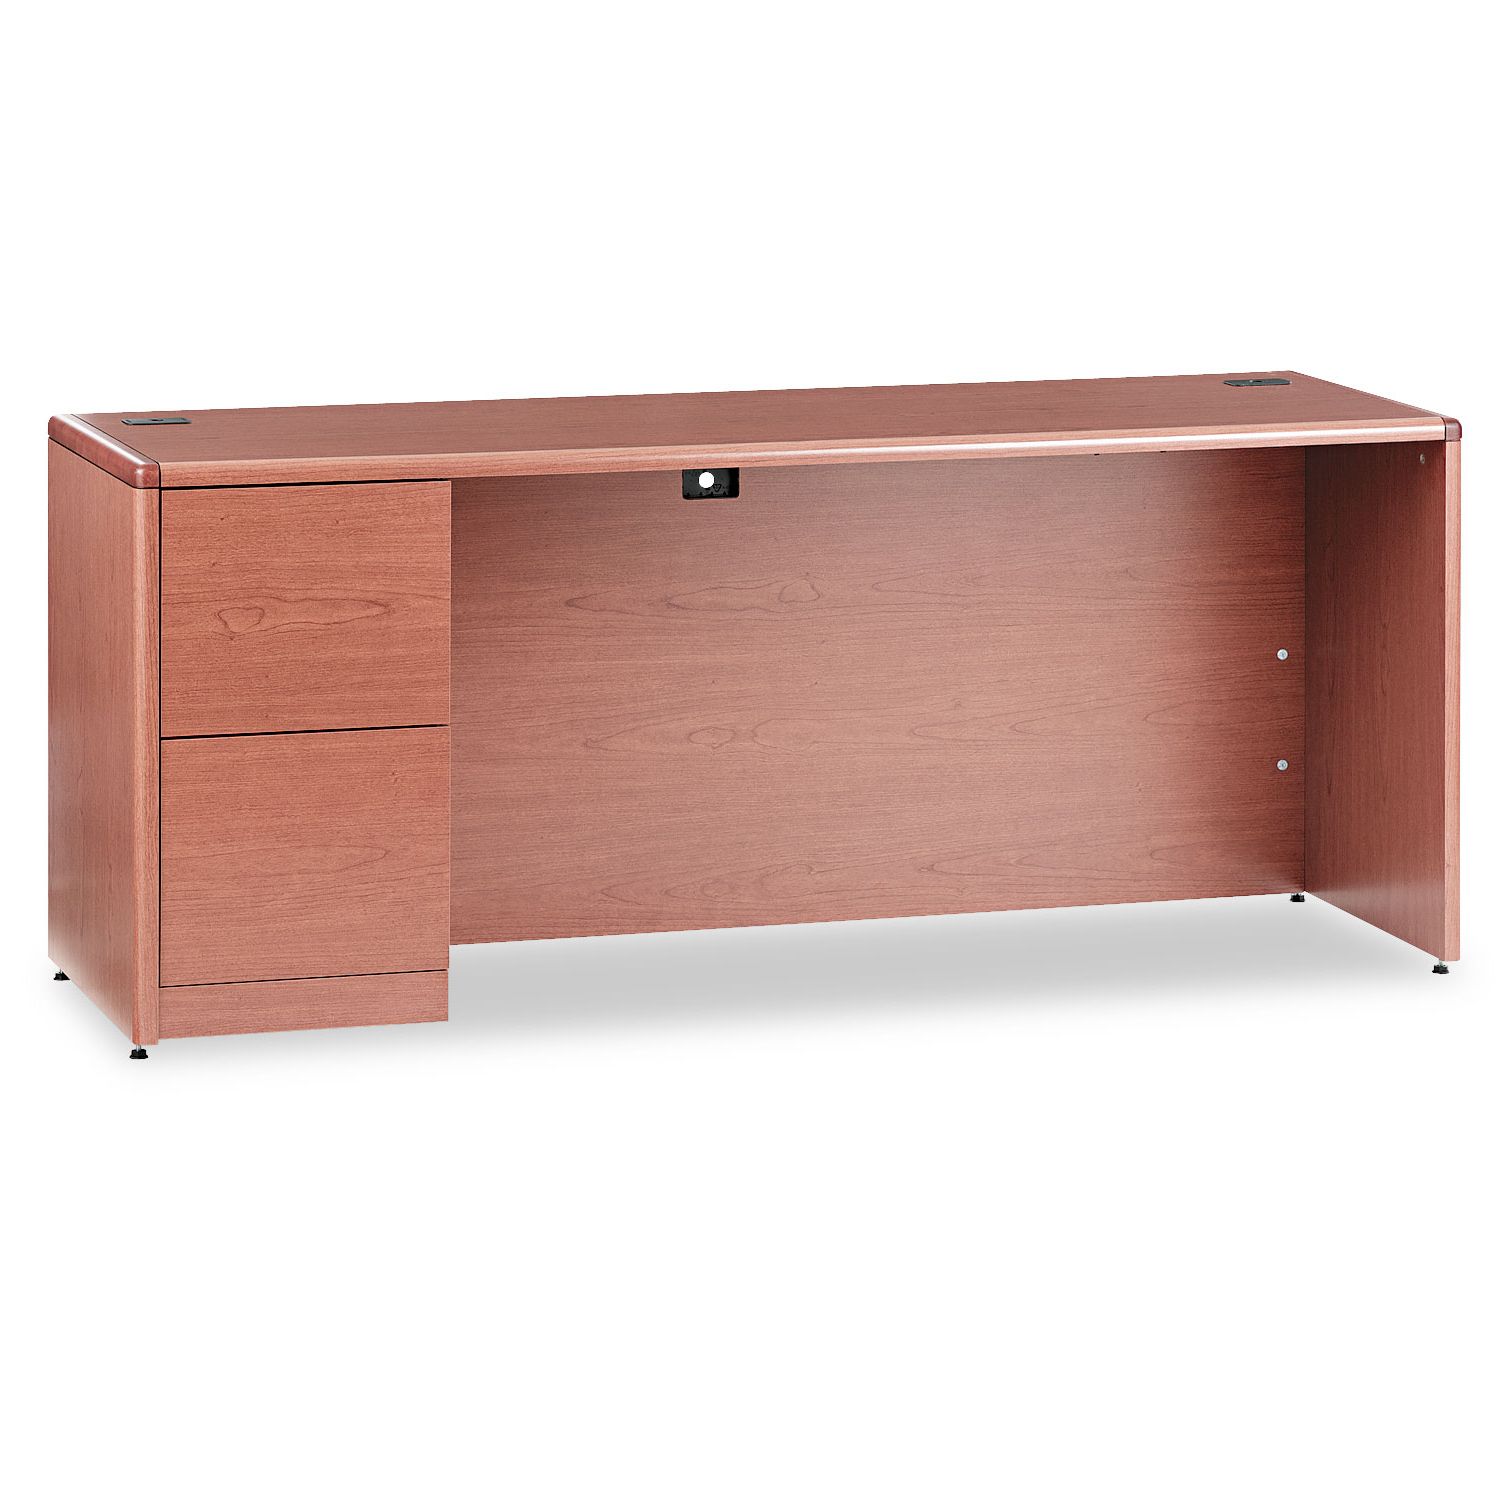 10700 Series Right Pedestal Credenza, 72w X 24d X 29 1/2h Intended For Barr Credenzas (Gallery 10 of 20)